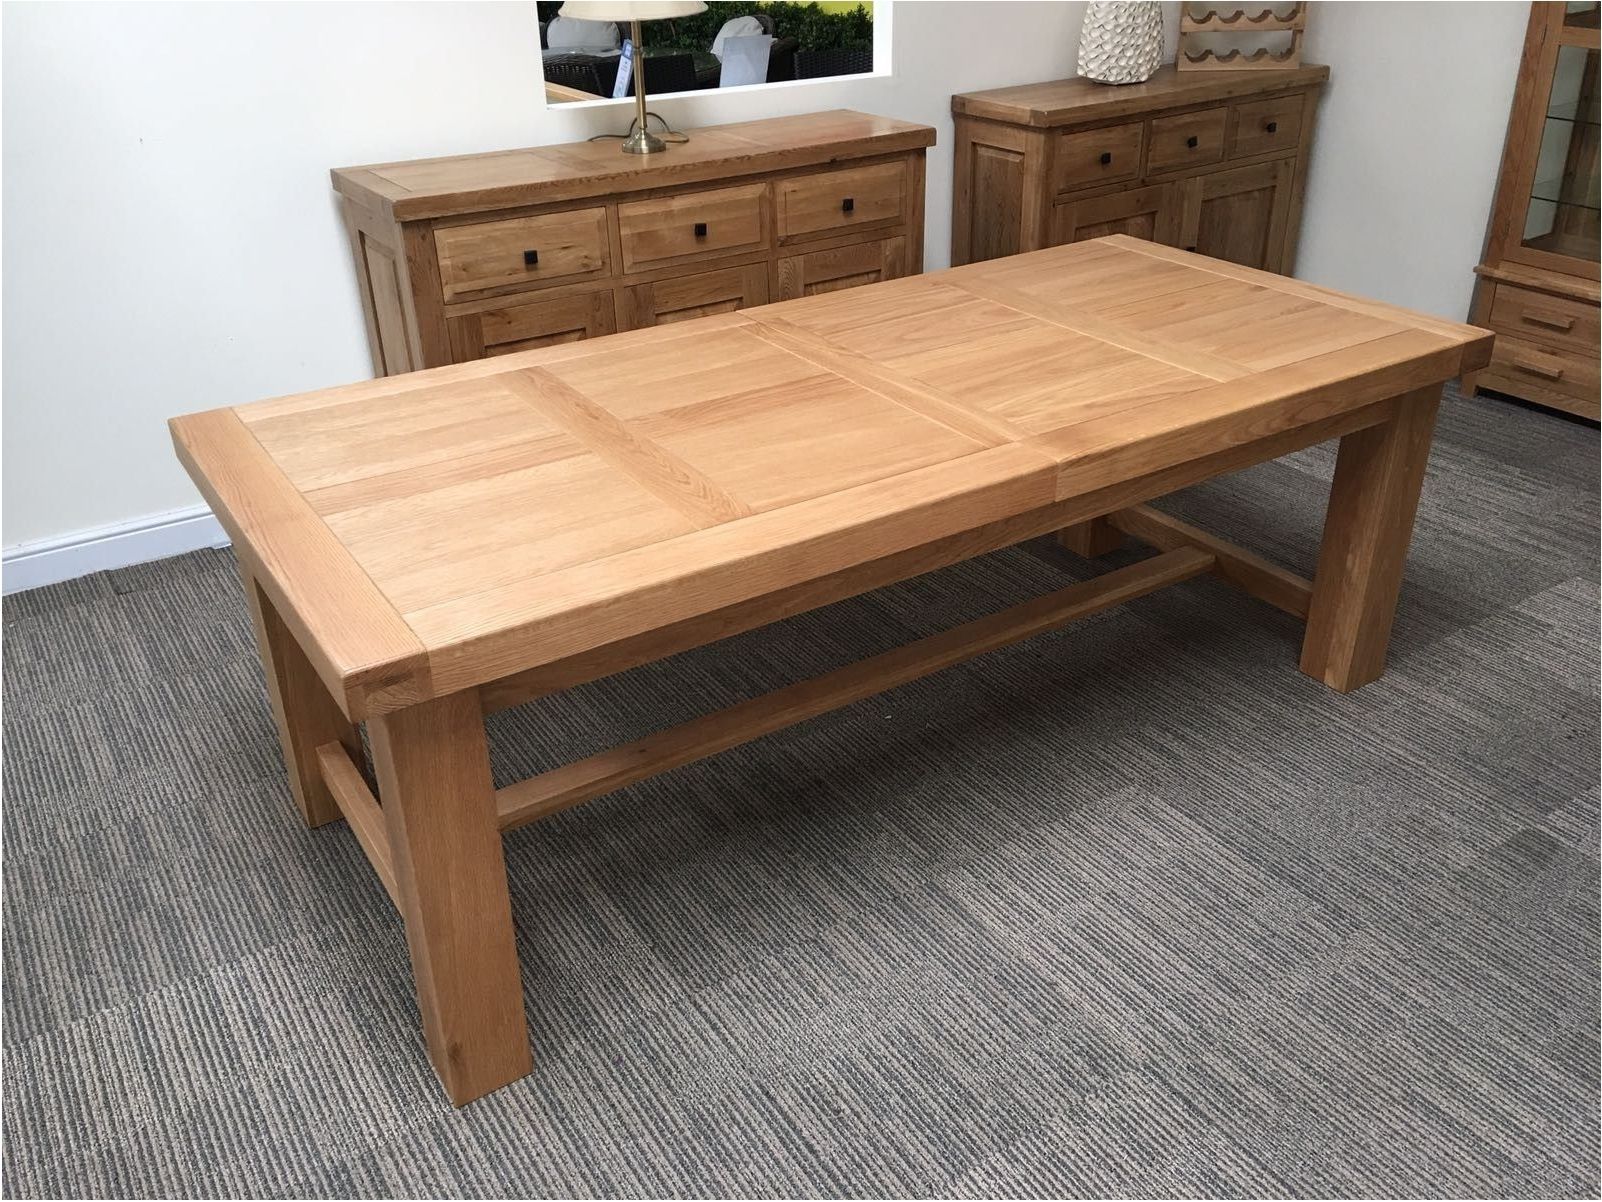 Oak Extending Dining Sets Regarding Well Liked Remarkable Oxford Solid Oak Extending Dining Table Oak Furniture (View 17 of 25)